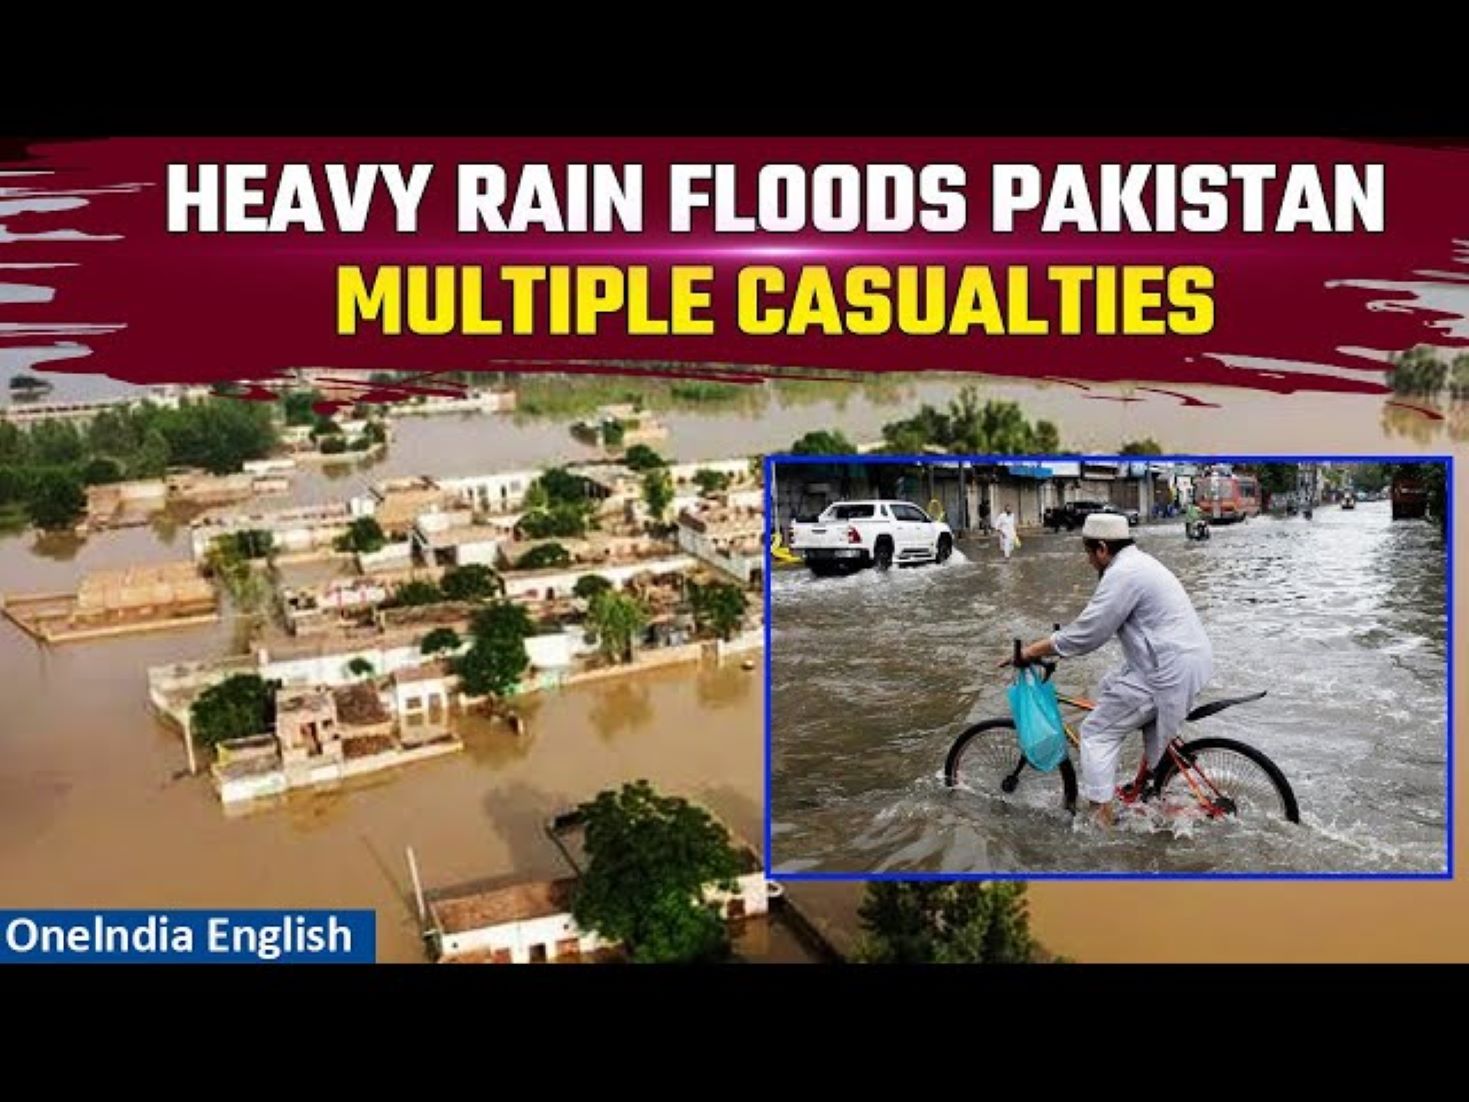 39 Killed In Rain-Triggered Accidents In Pakistan